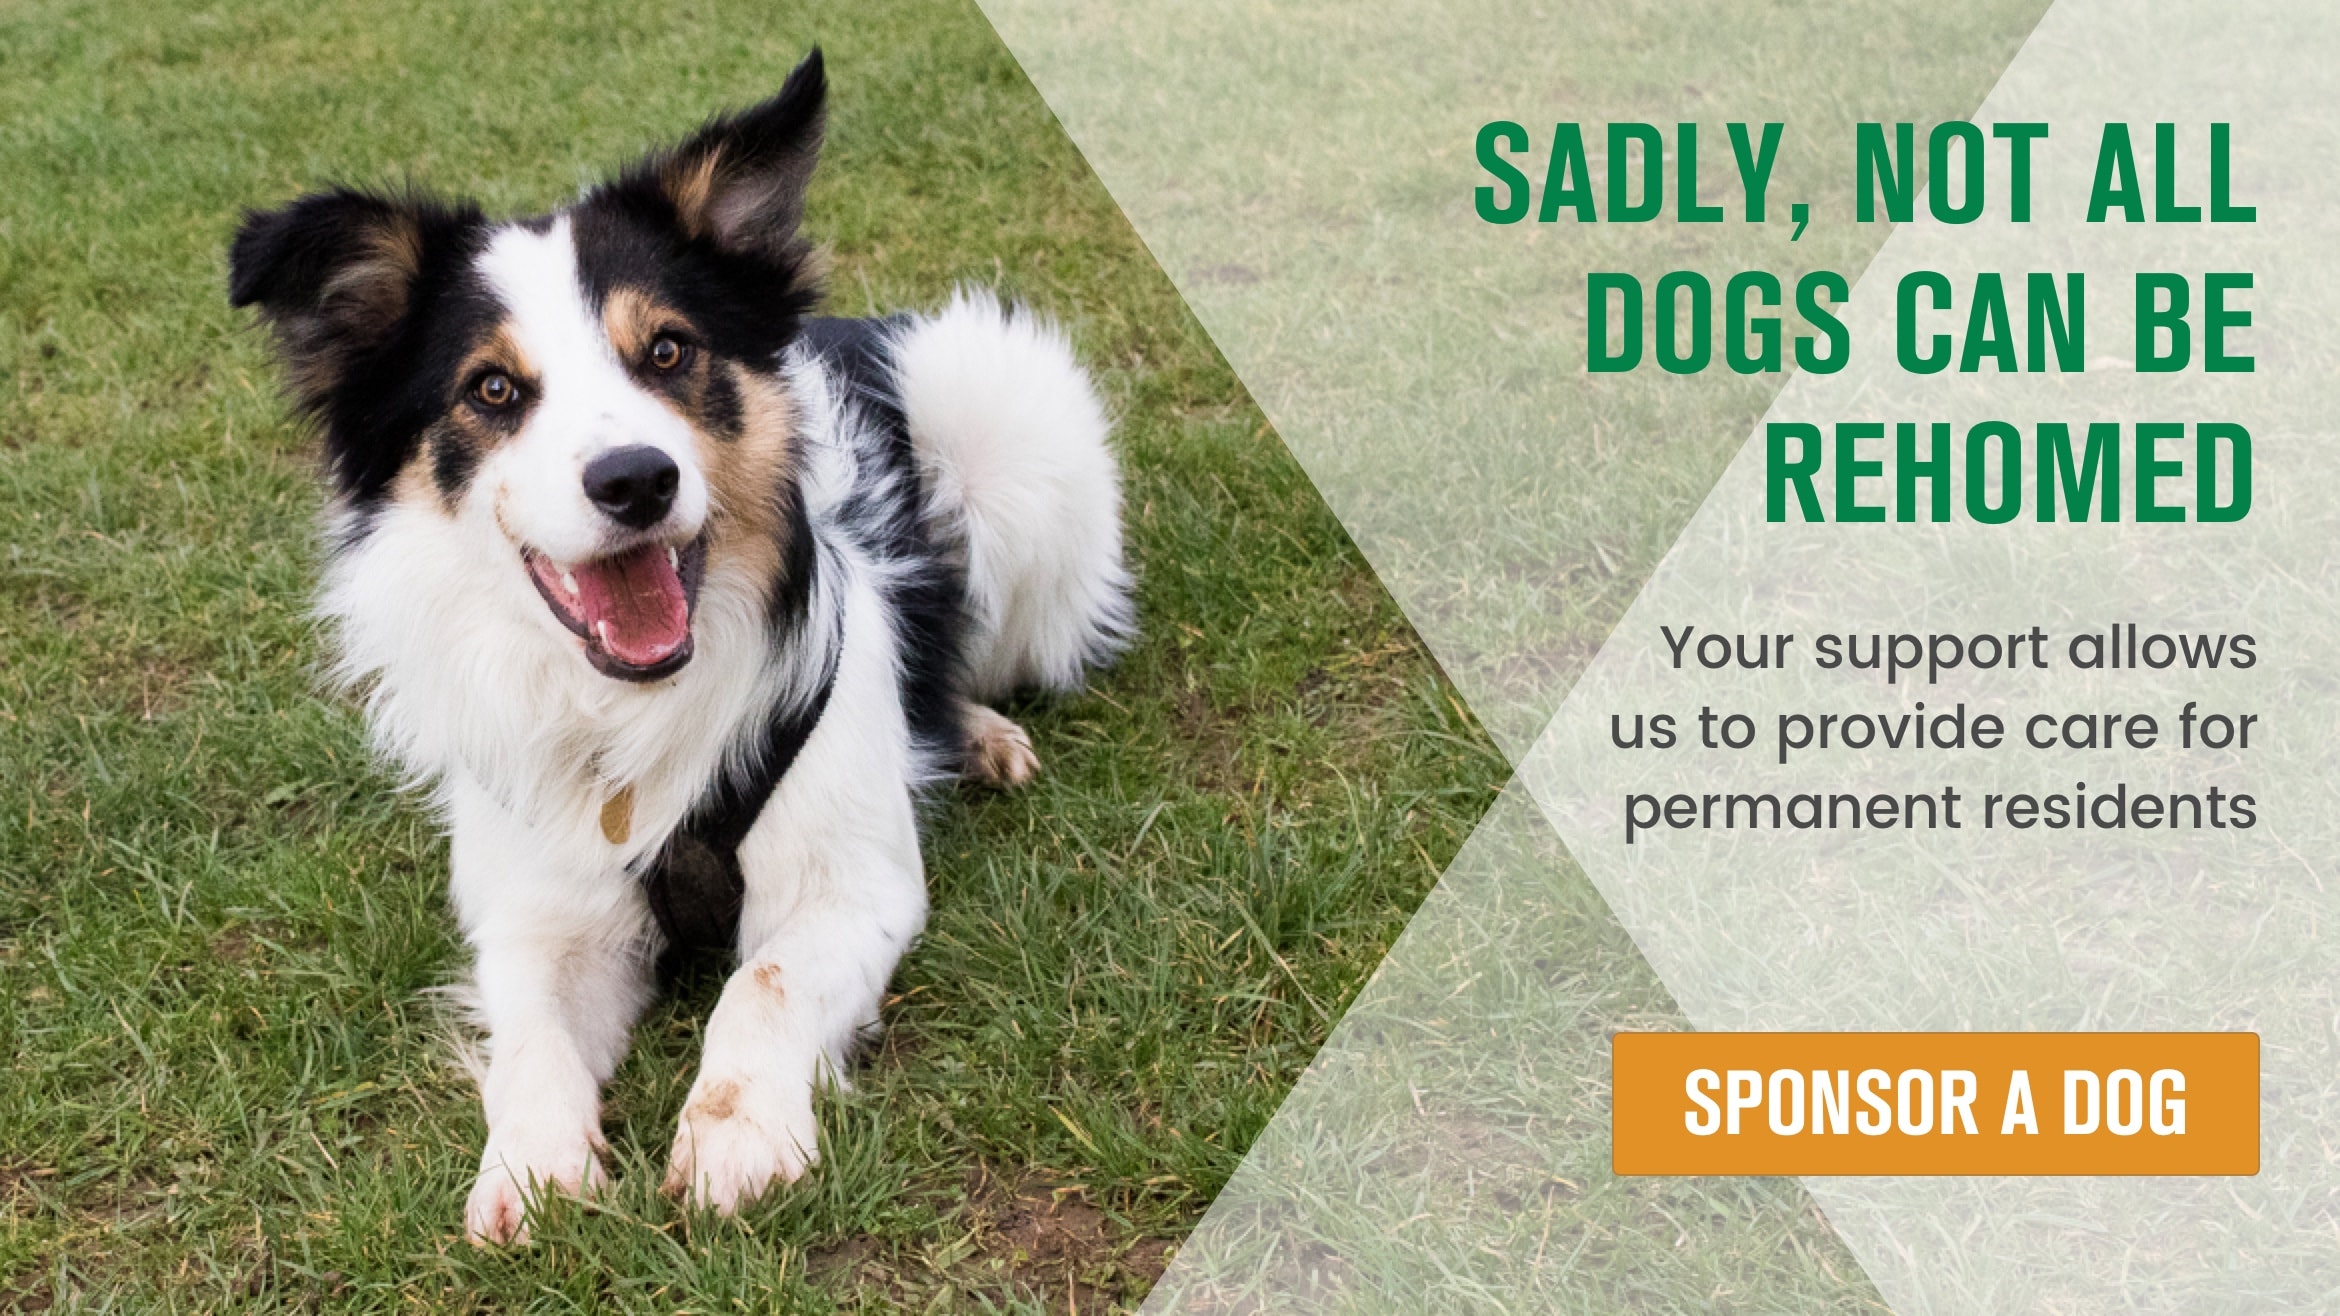 Sadly, not all dogs can be rehomed. Can you help one of our permanent residents?